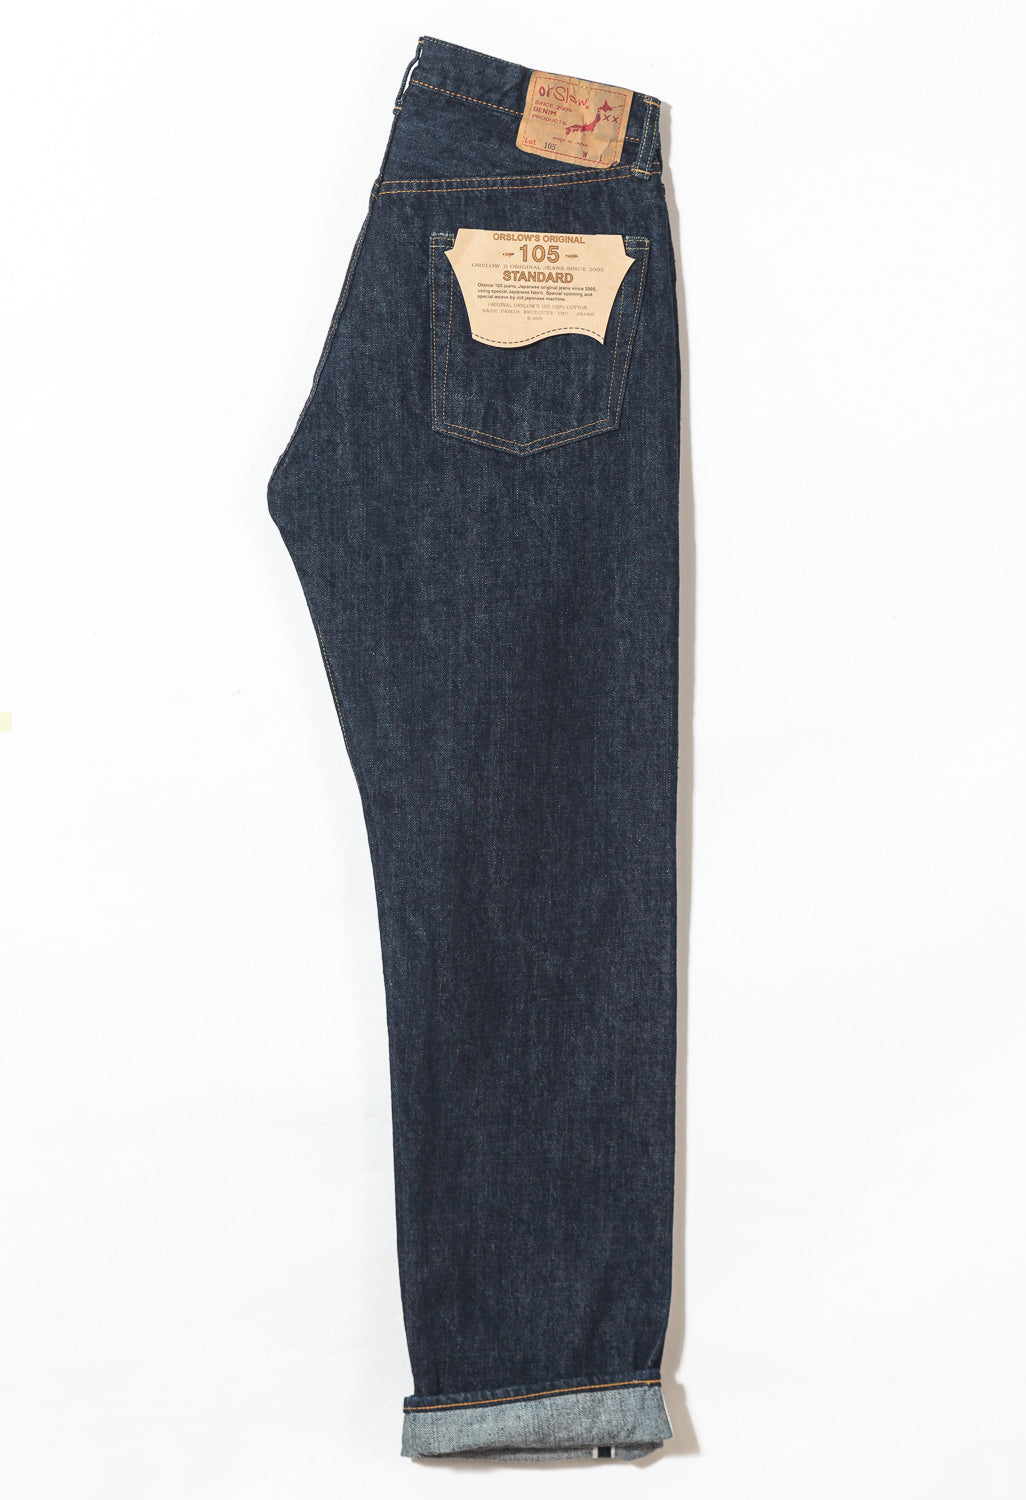 orSlow 105 Standard Fit Jeans - One Wash